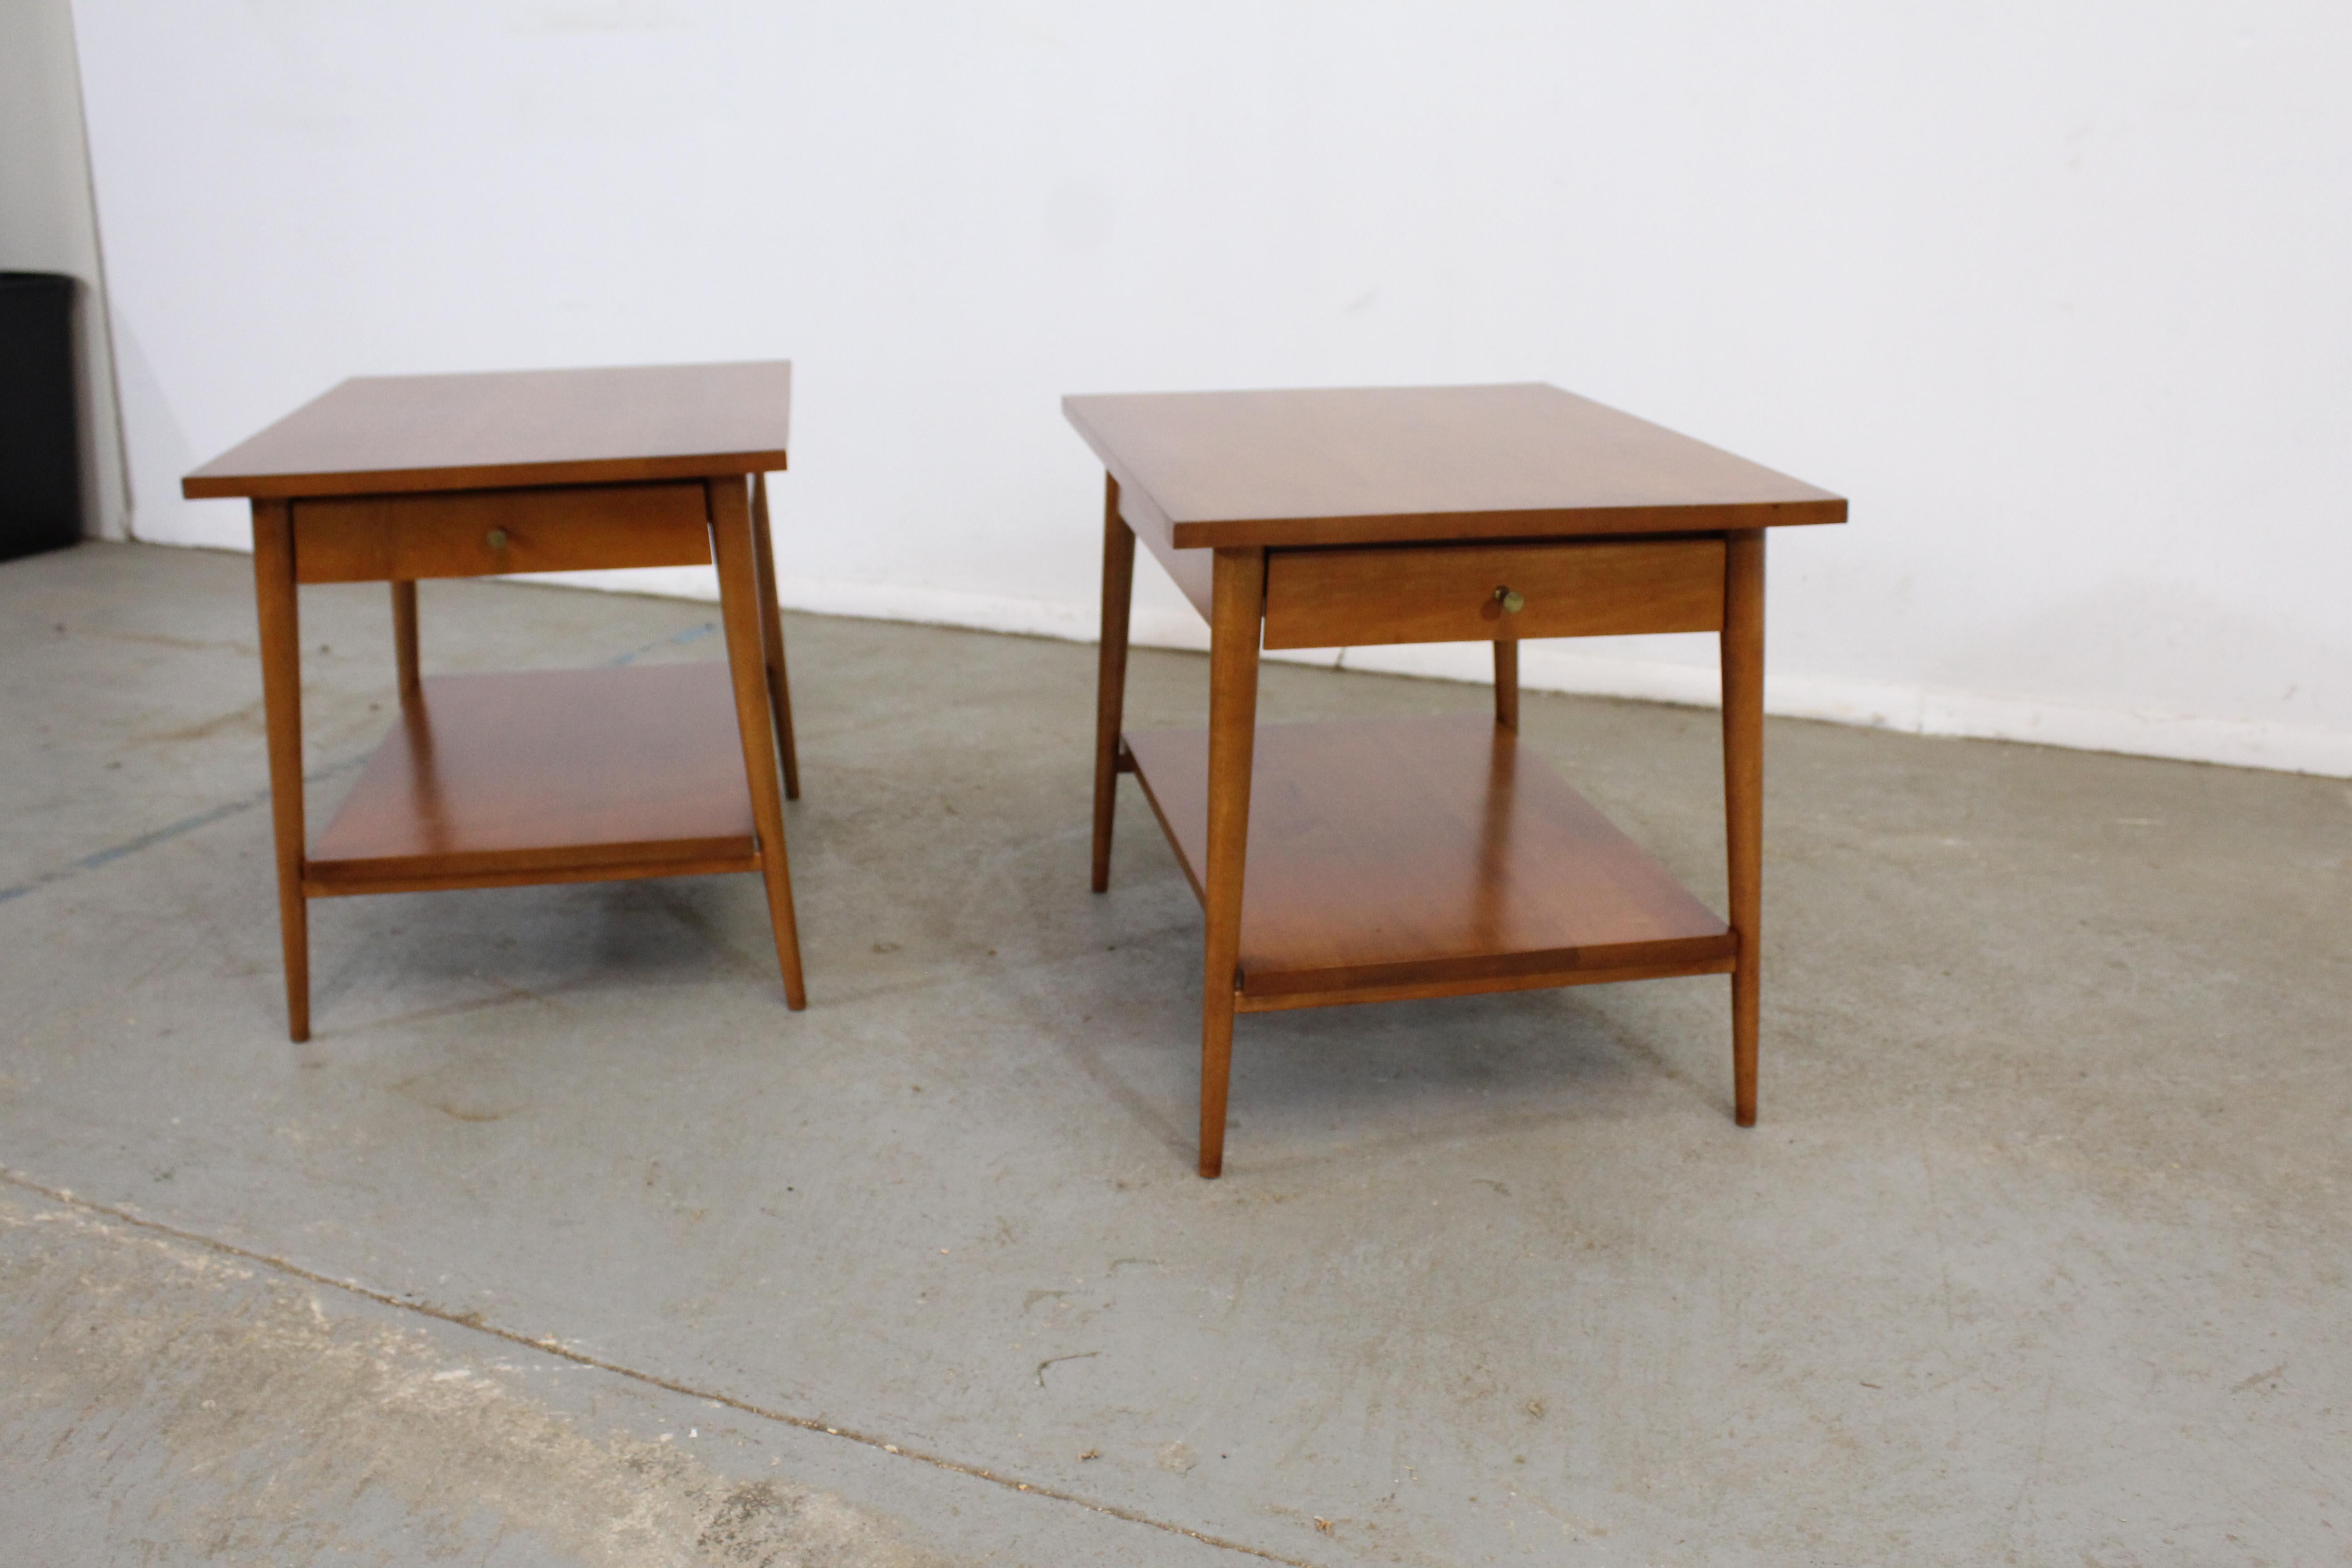 North American Mid-Century Modern Paul Mccobb Nightstands/End Tables For Sale